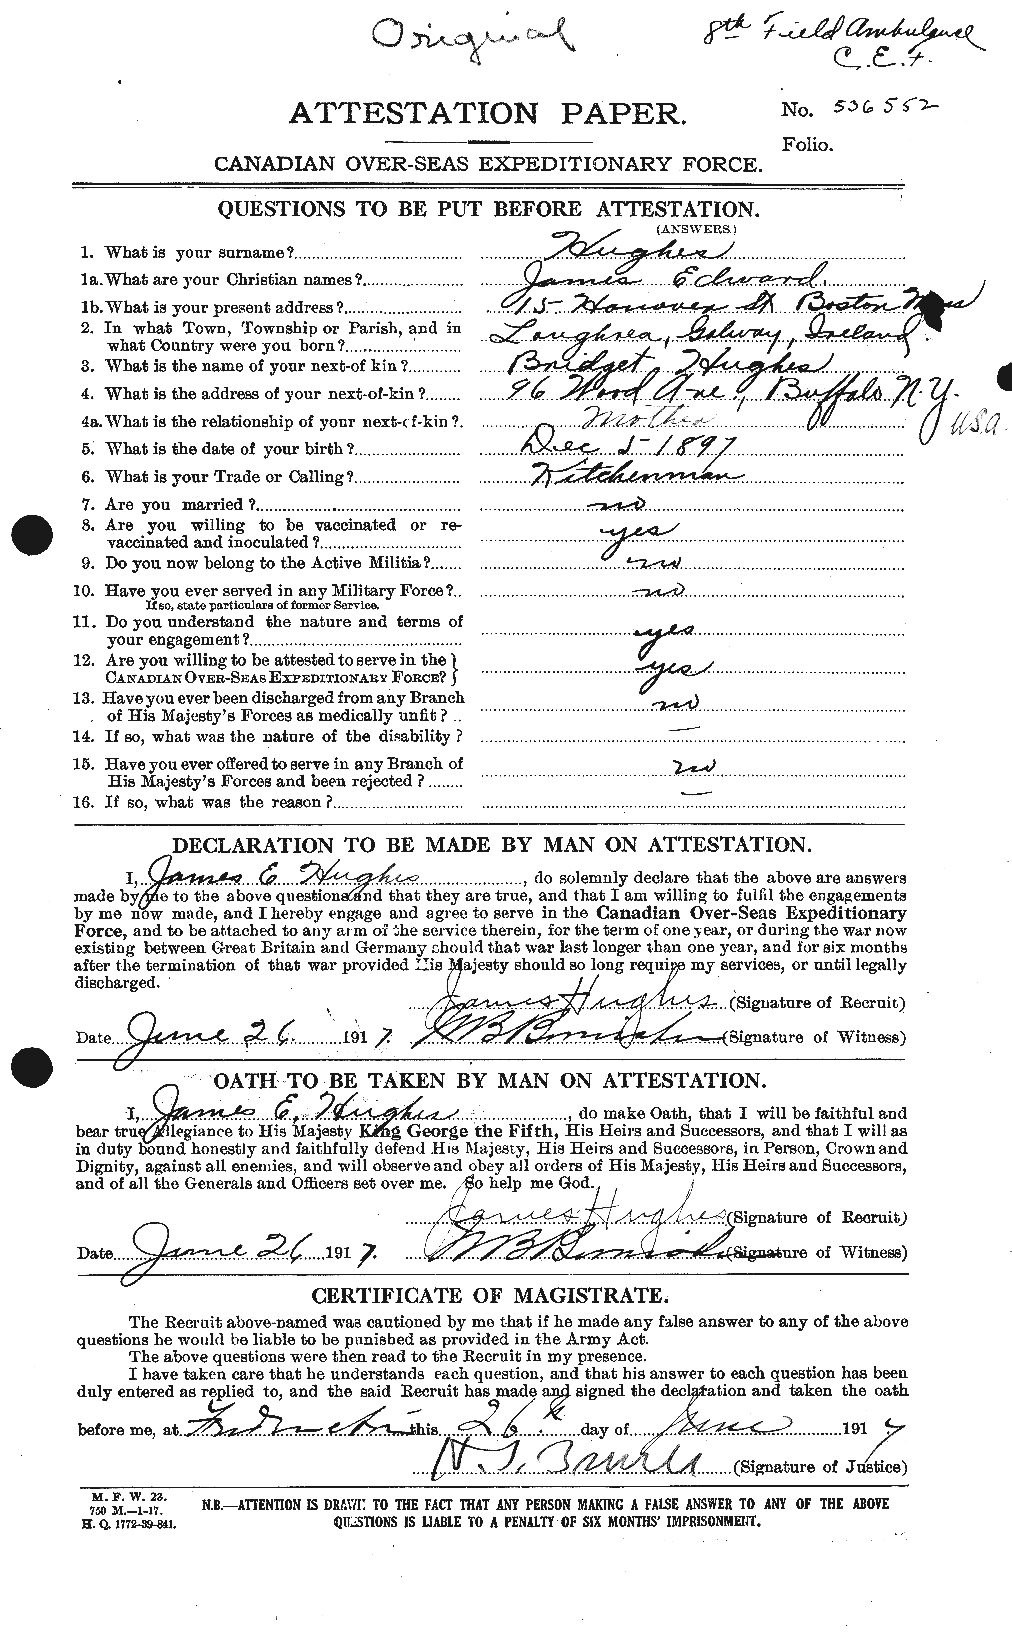 Personnel Records of the First World War - CEF 403960a